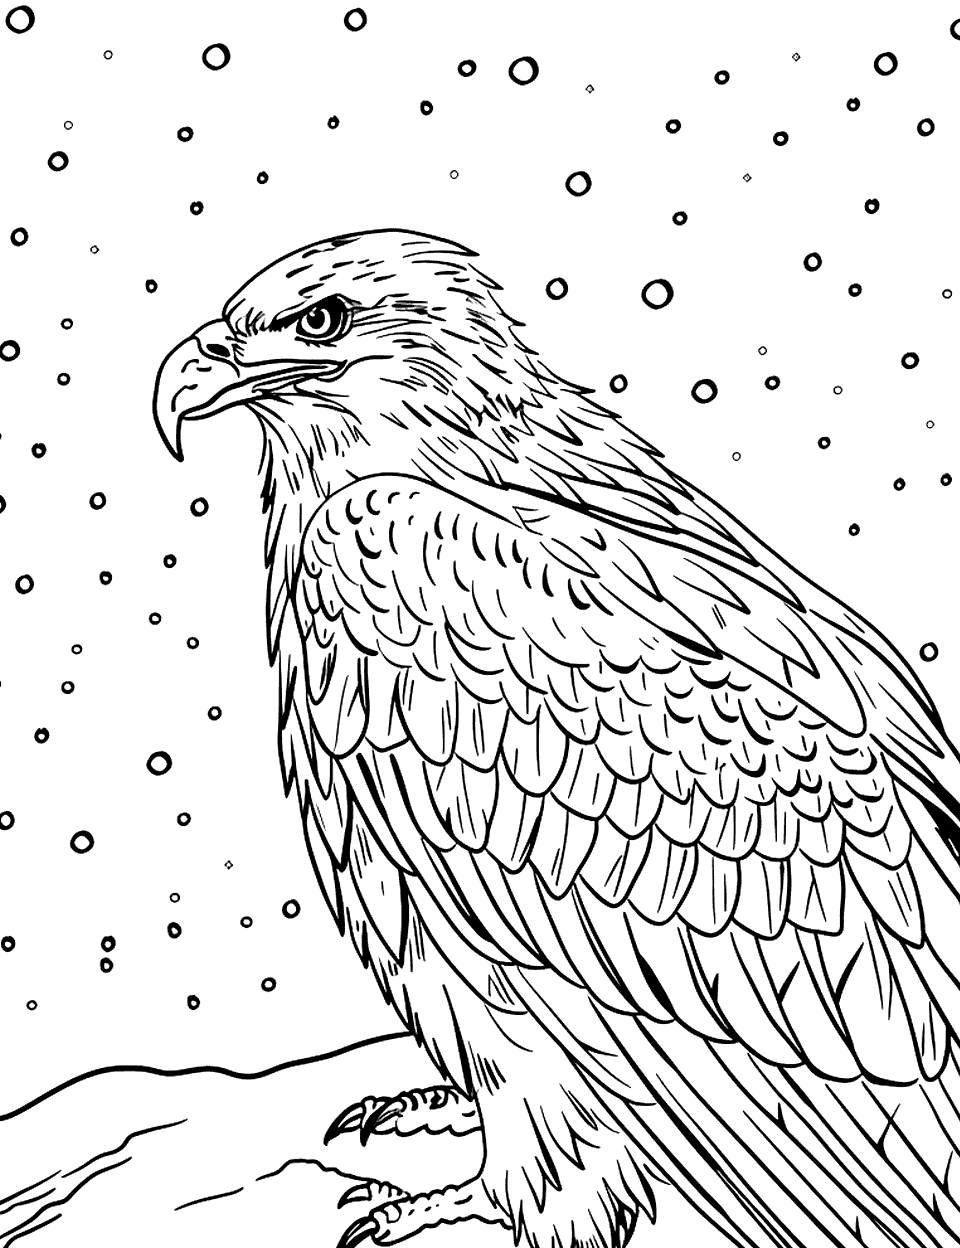 Young Eagle's First Snow Eagle Coloring Page - A young eagle experiences its first snow, looking curiously at the snowflakes.